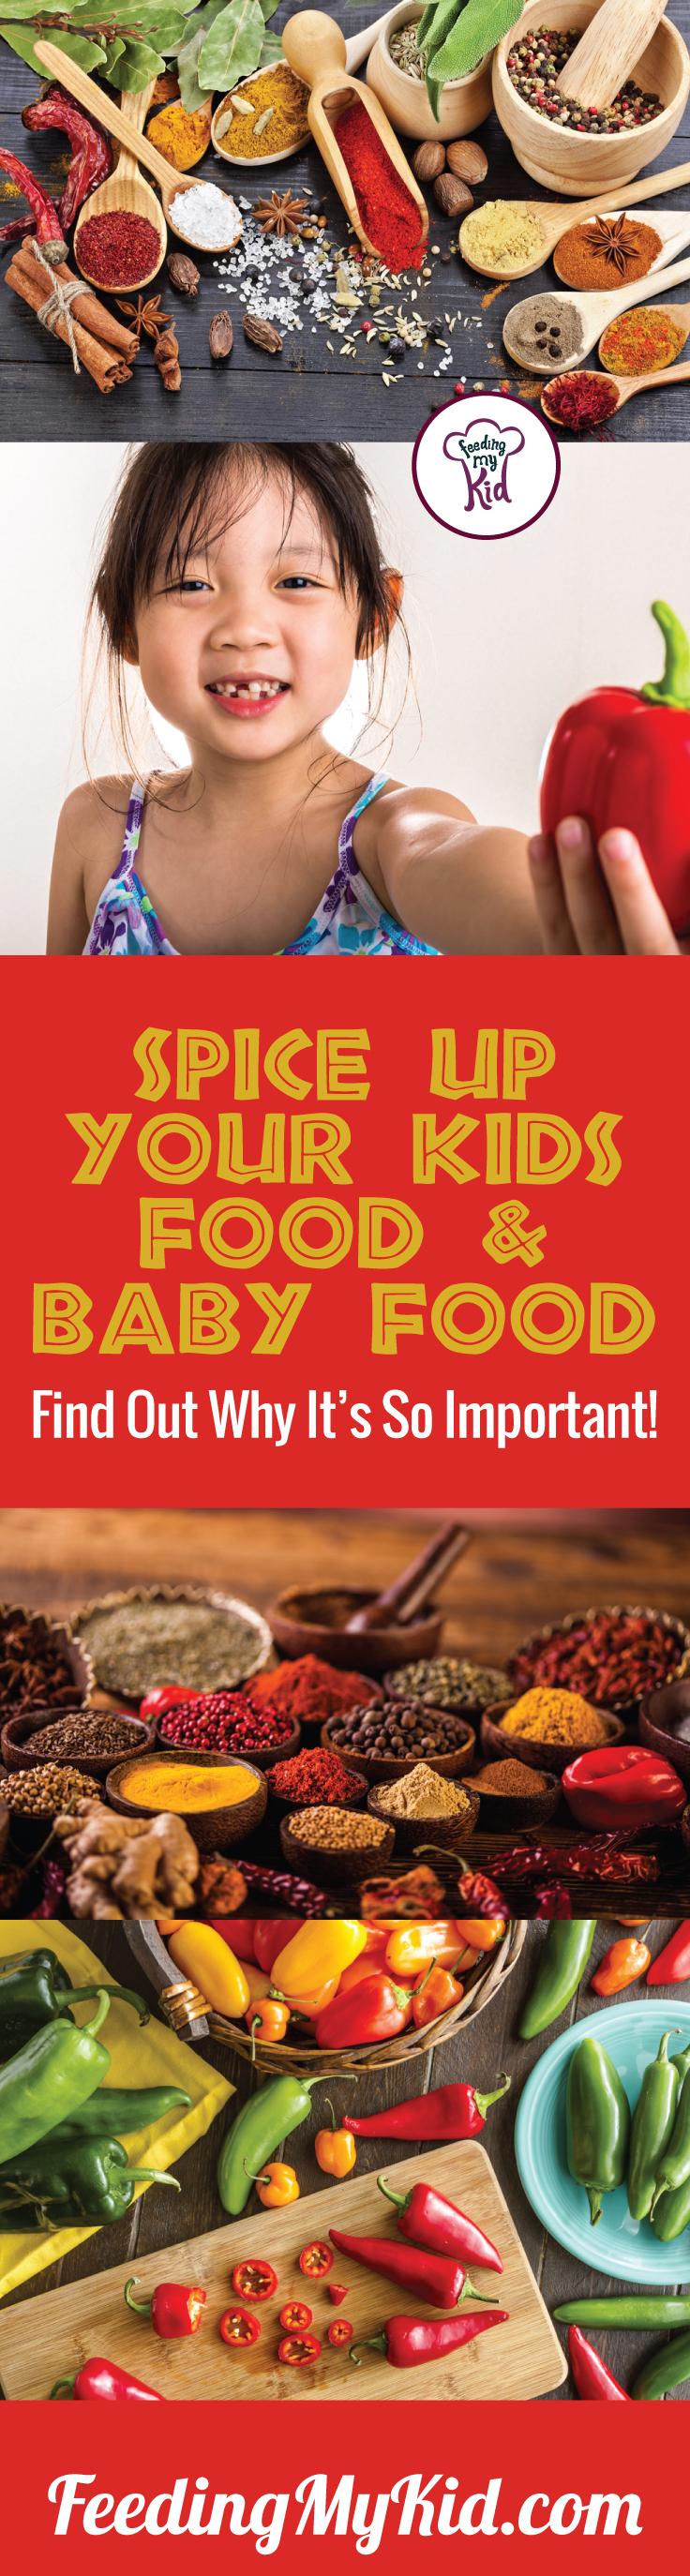 This is a must pin! Spice up your kids food to get them to eat foods they normally wouldn’t. Add spices to homemade baby food. Find out more here. Feeding My Kid is filled with all the information you need about how to raise your kids, from healthy tips to nutritious recipes. #pickyeating #getkidstoeat #spice #spiceupfood #food 